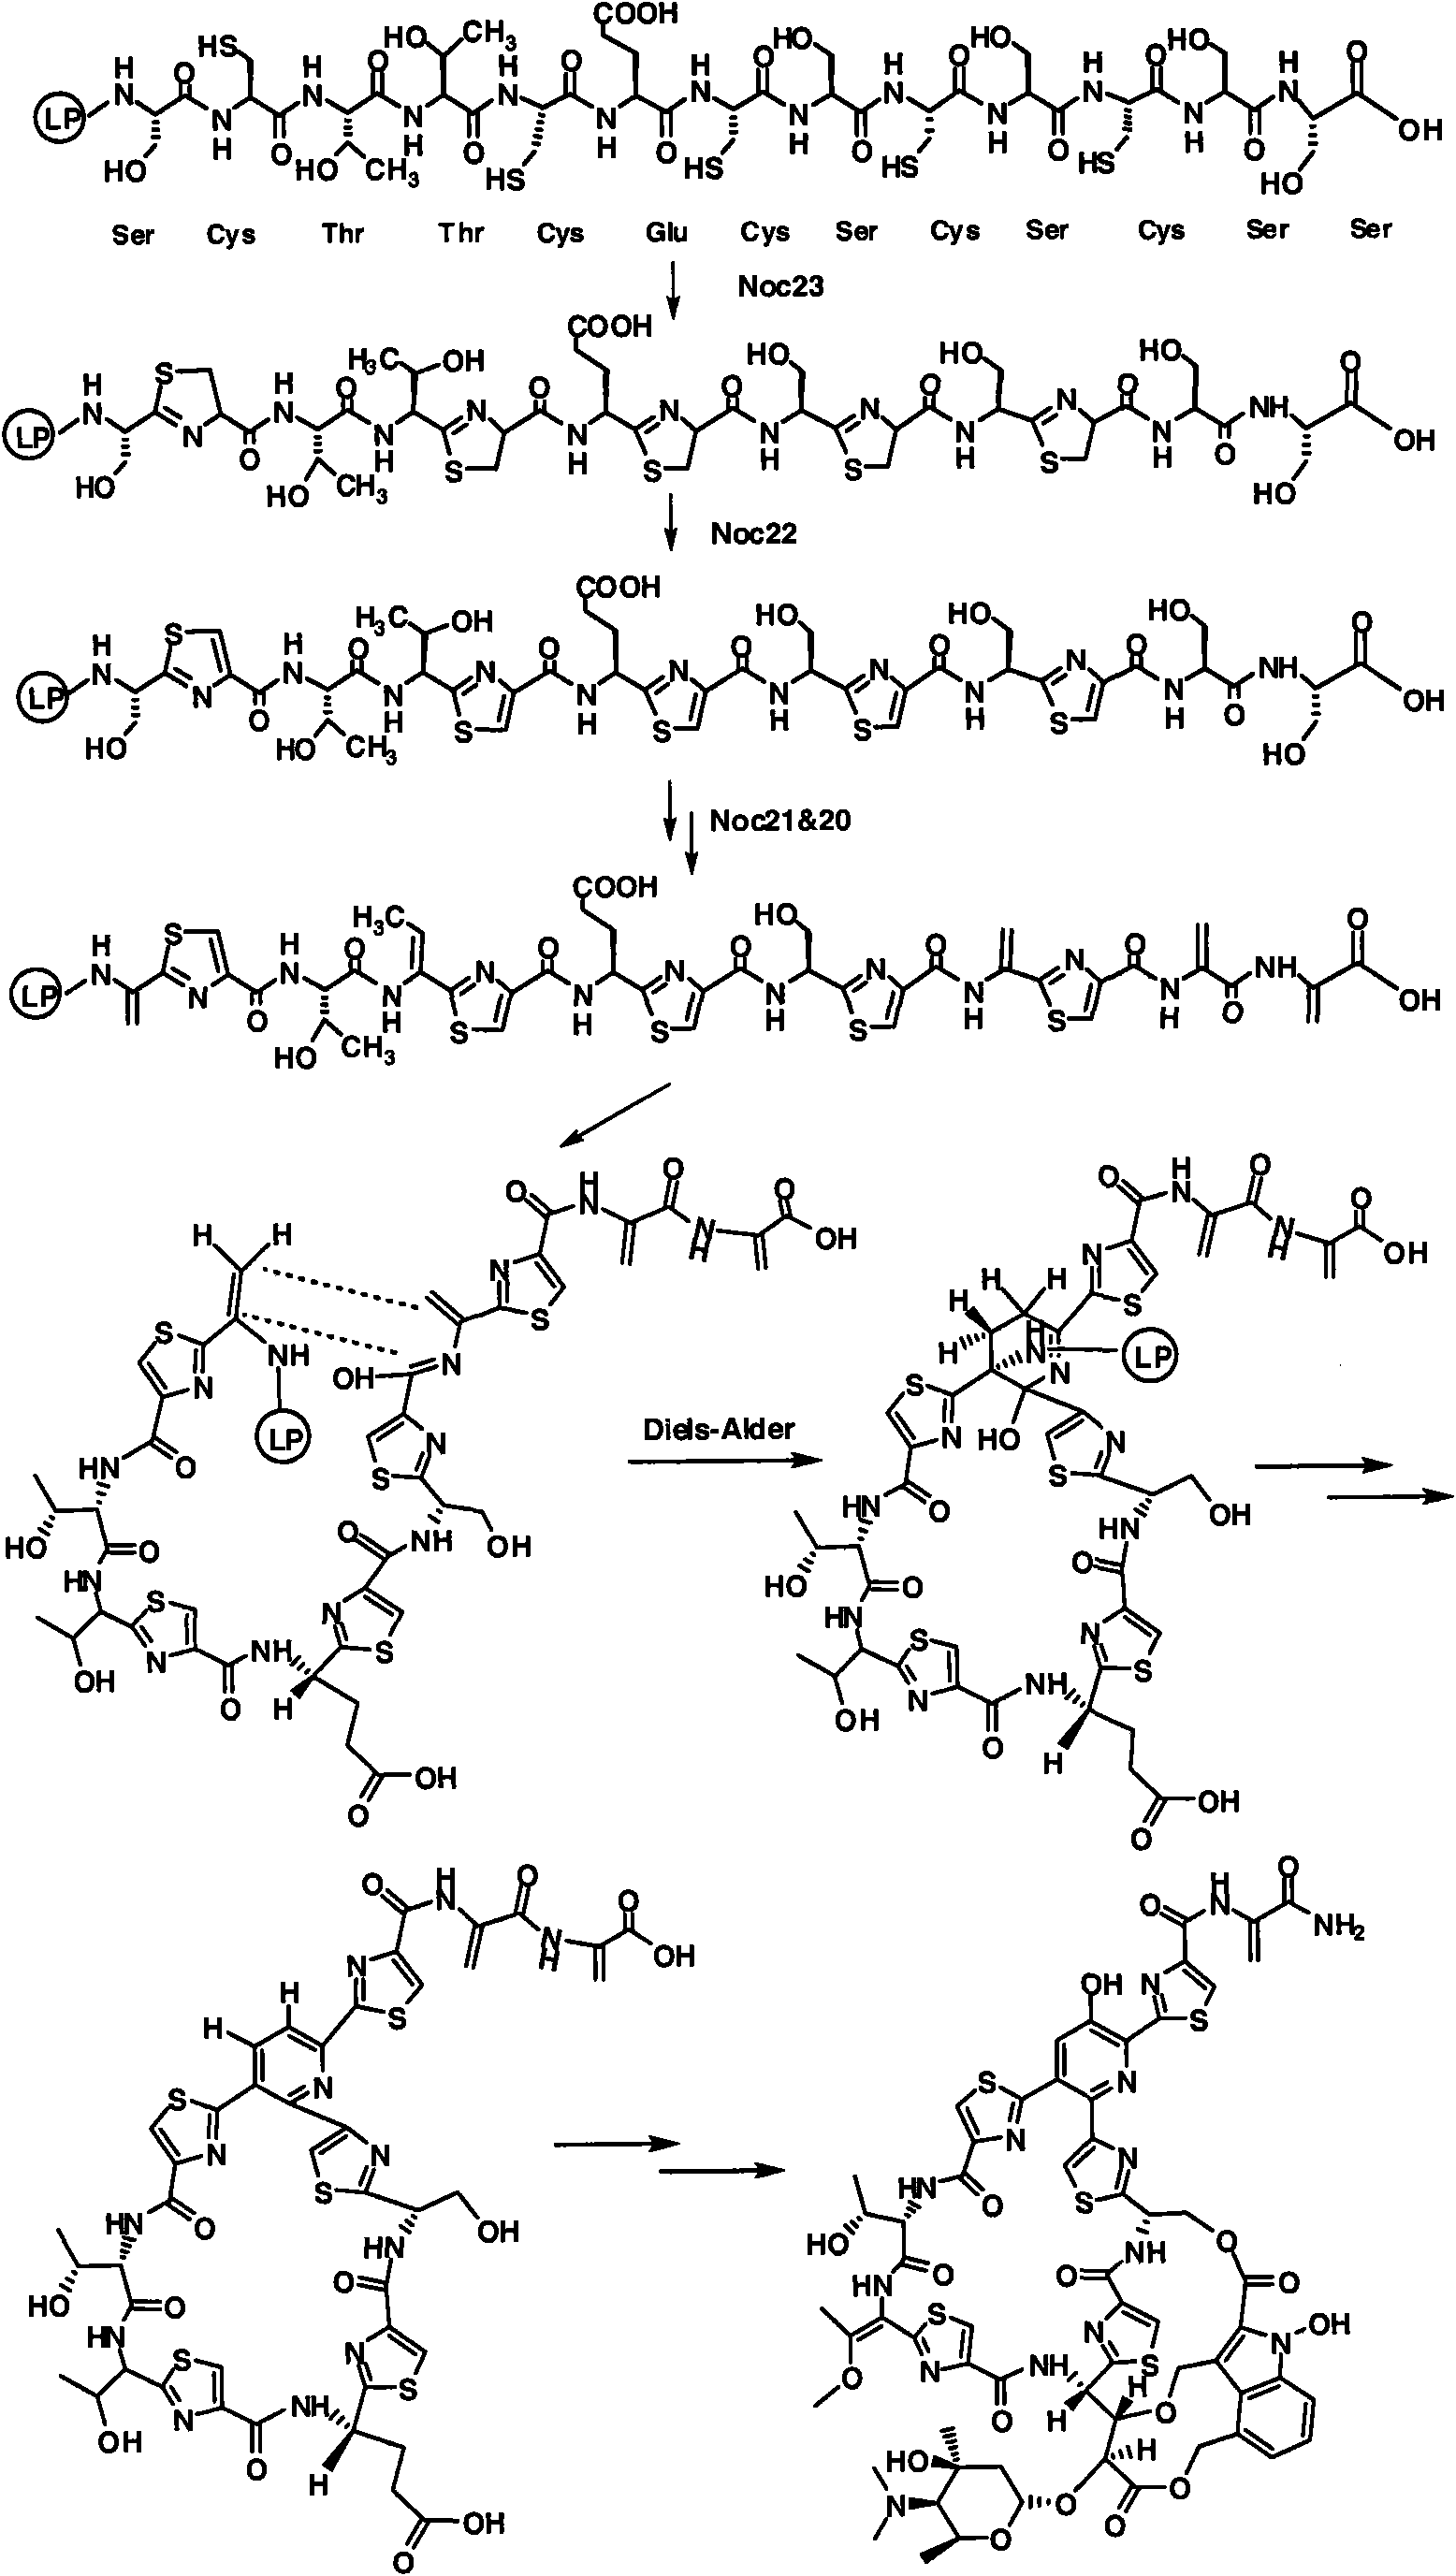 Biosynthesis gene cluster of Nocathiacins and application thereof